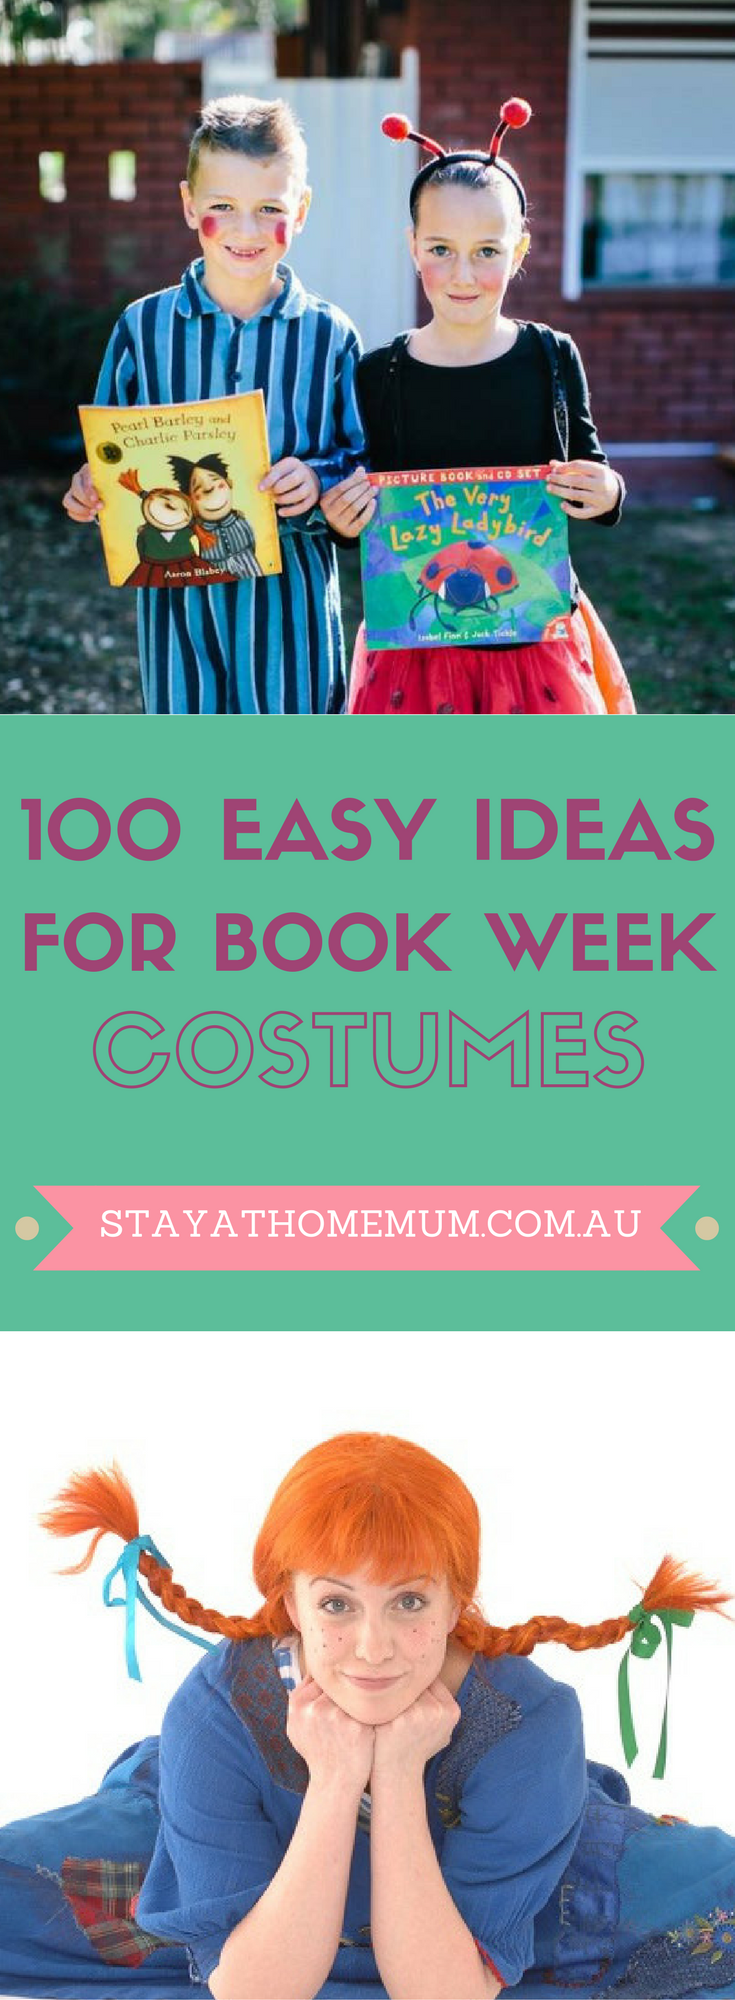 100 Easy Ideas for Book Week Costumes - Stay at Home Mum